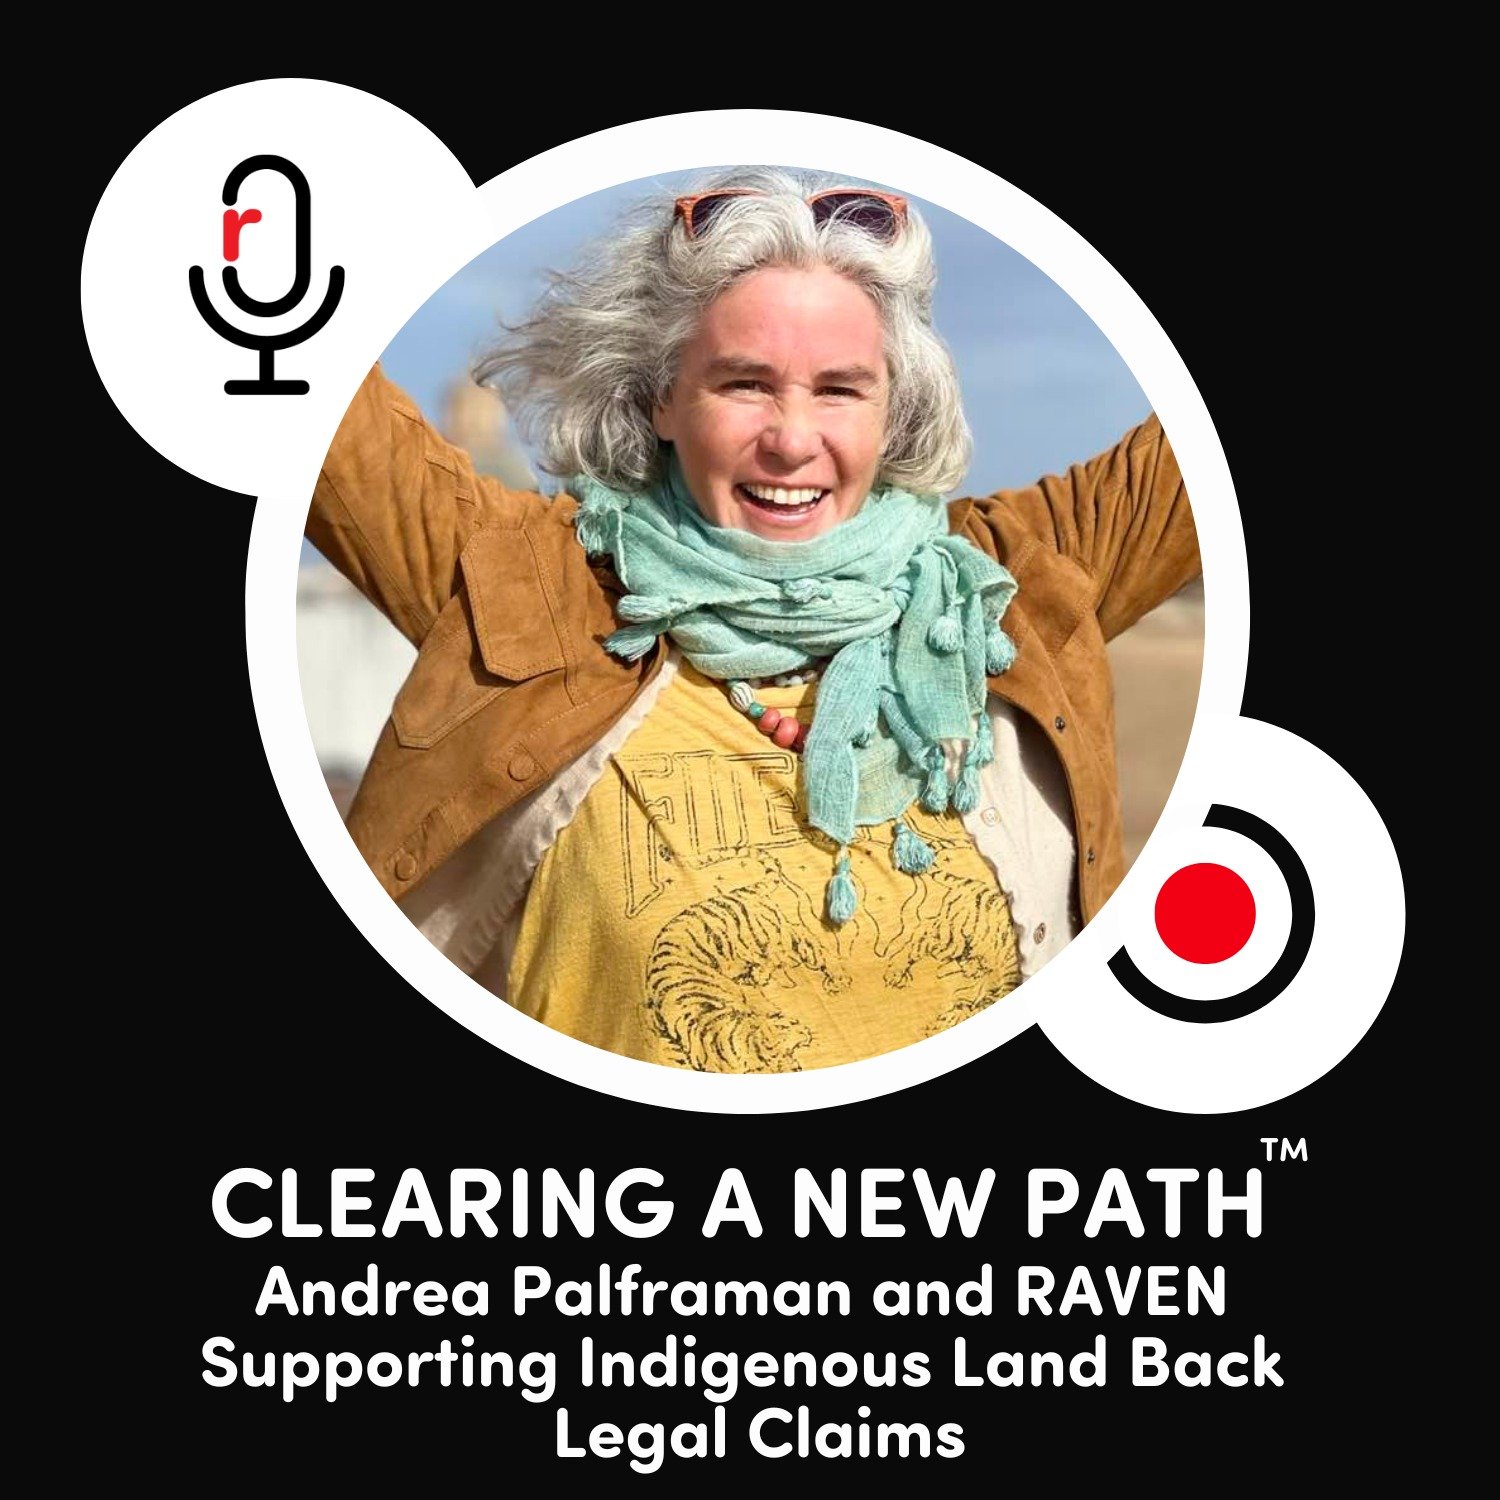 Andrea Palframan and RAVEN - Supporting Indigenous Land Back Legal Claims